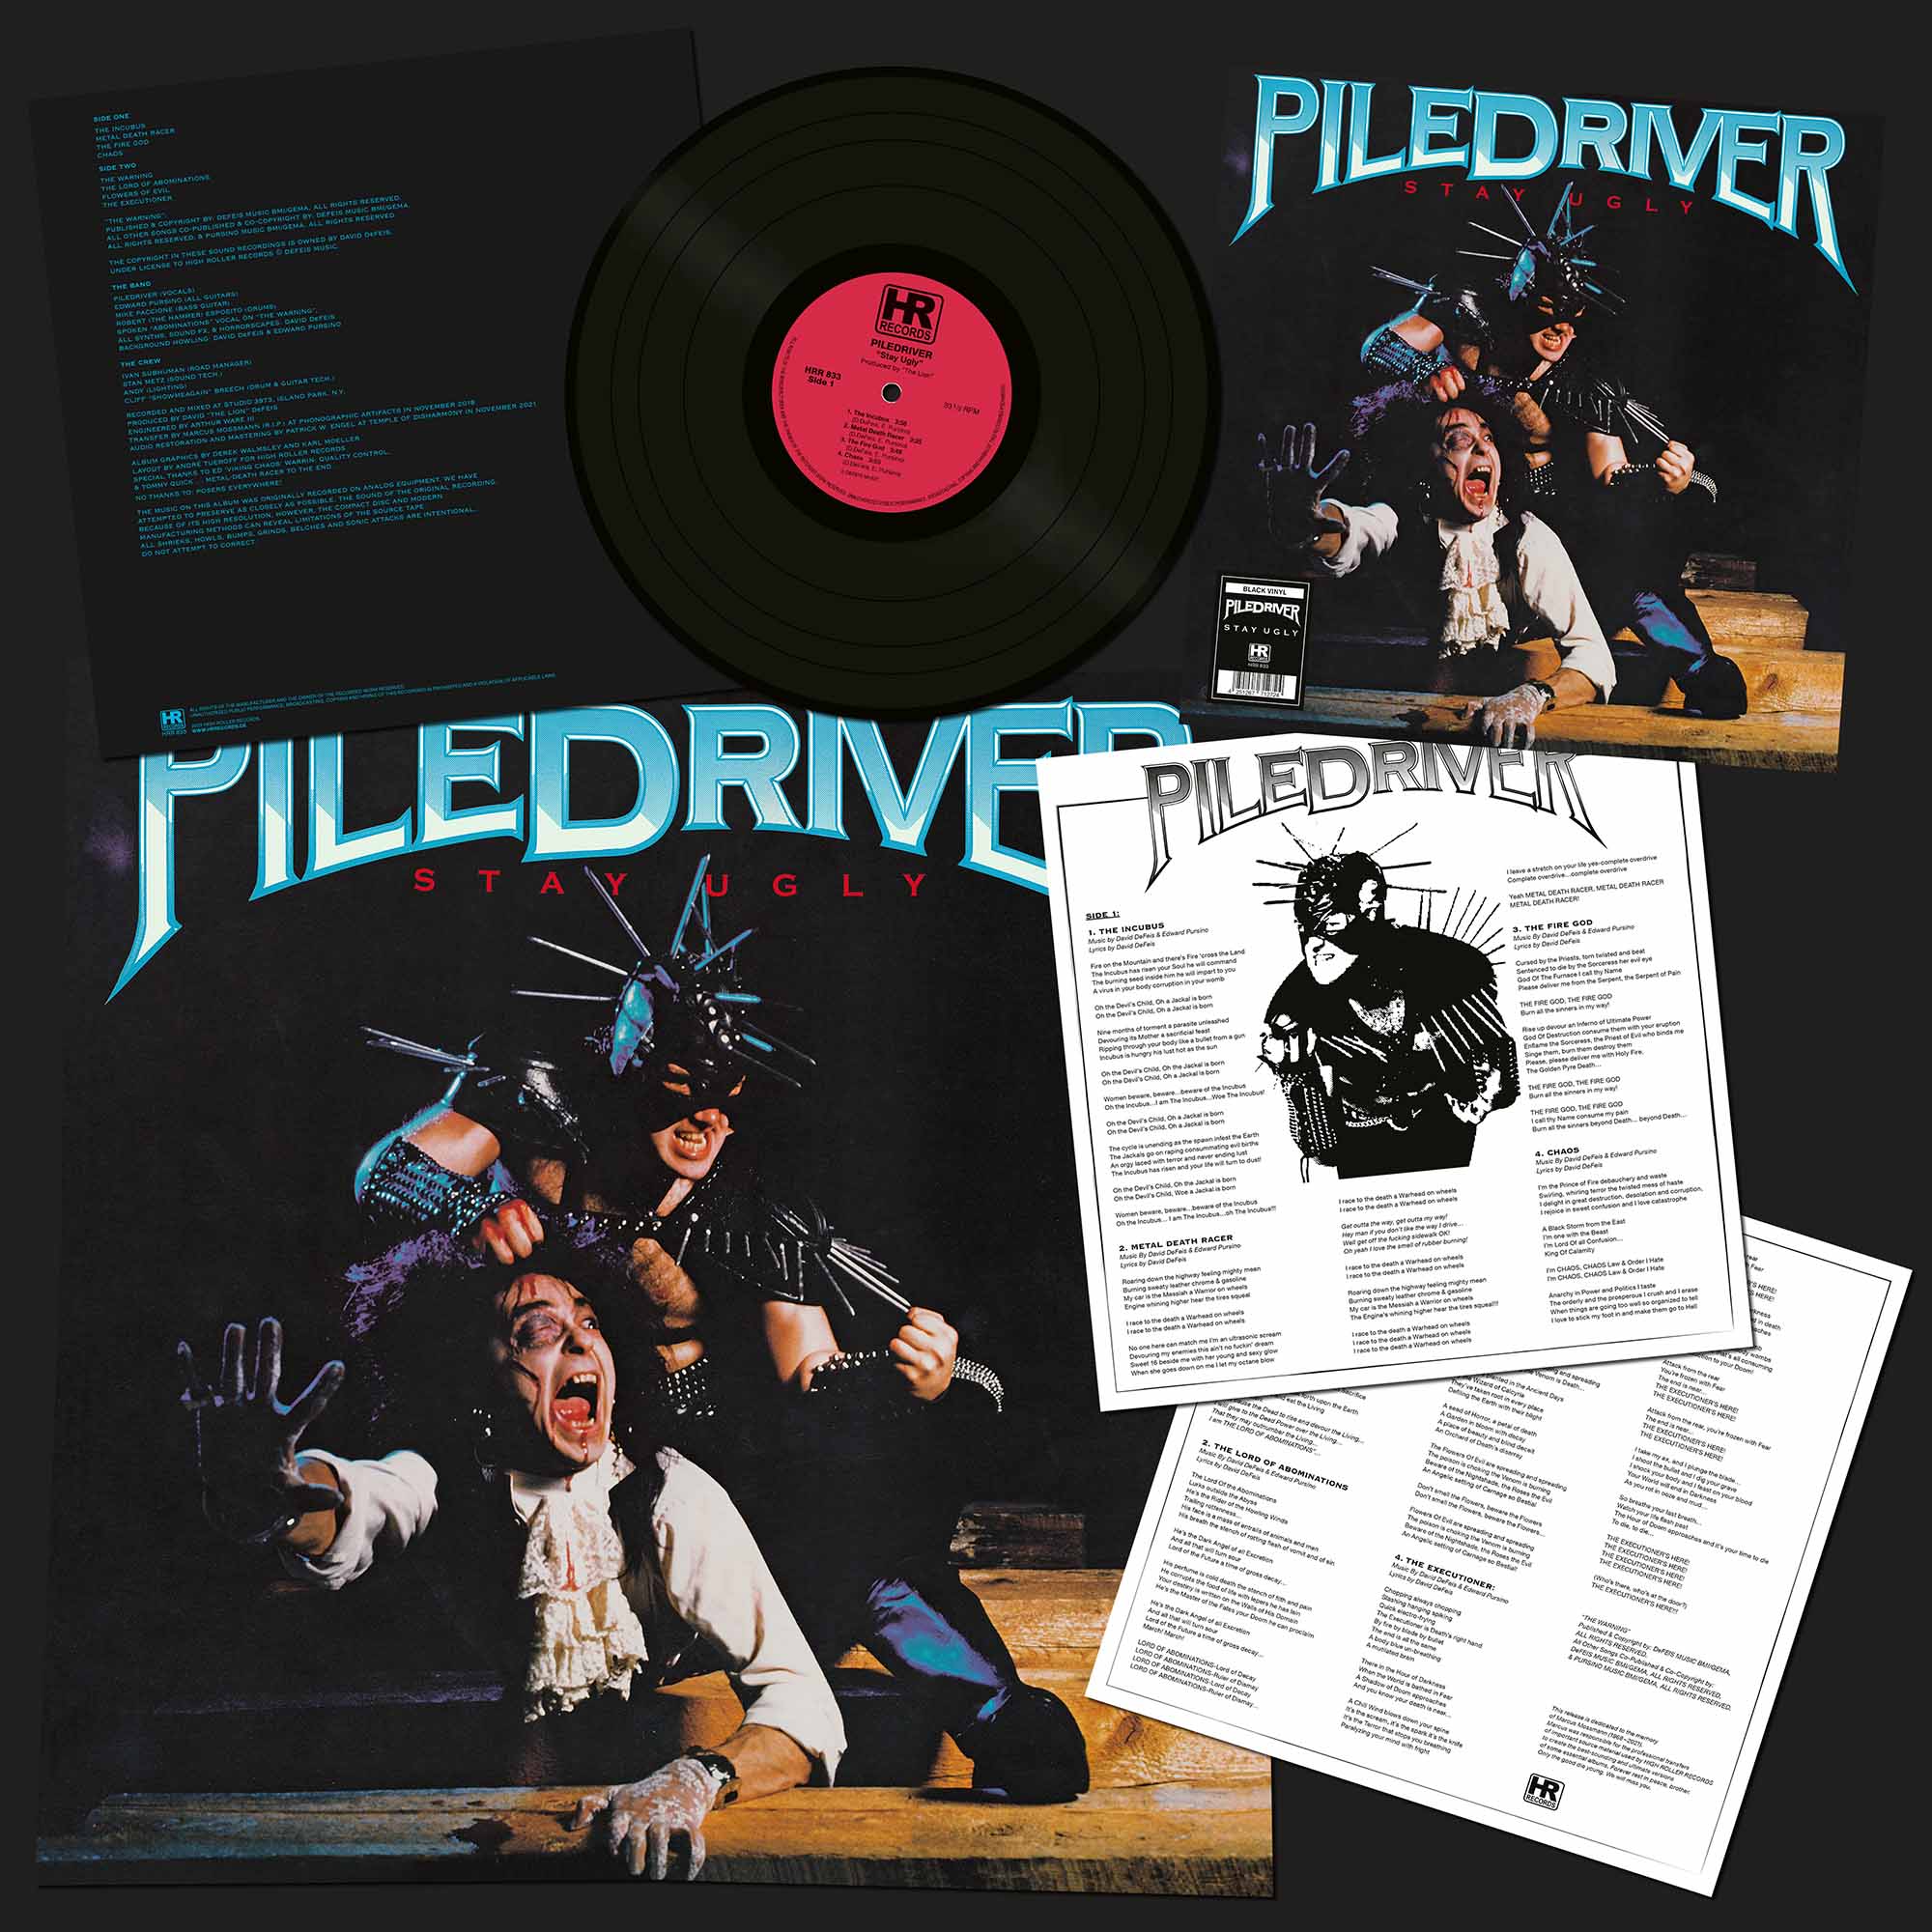 PILEDRIVER - Stay Ugly  LP